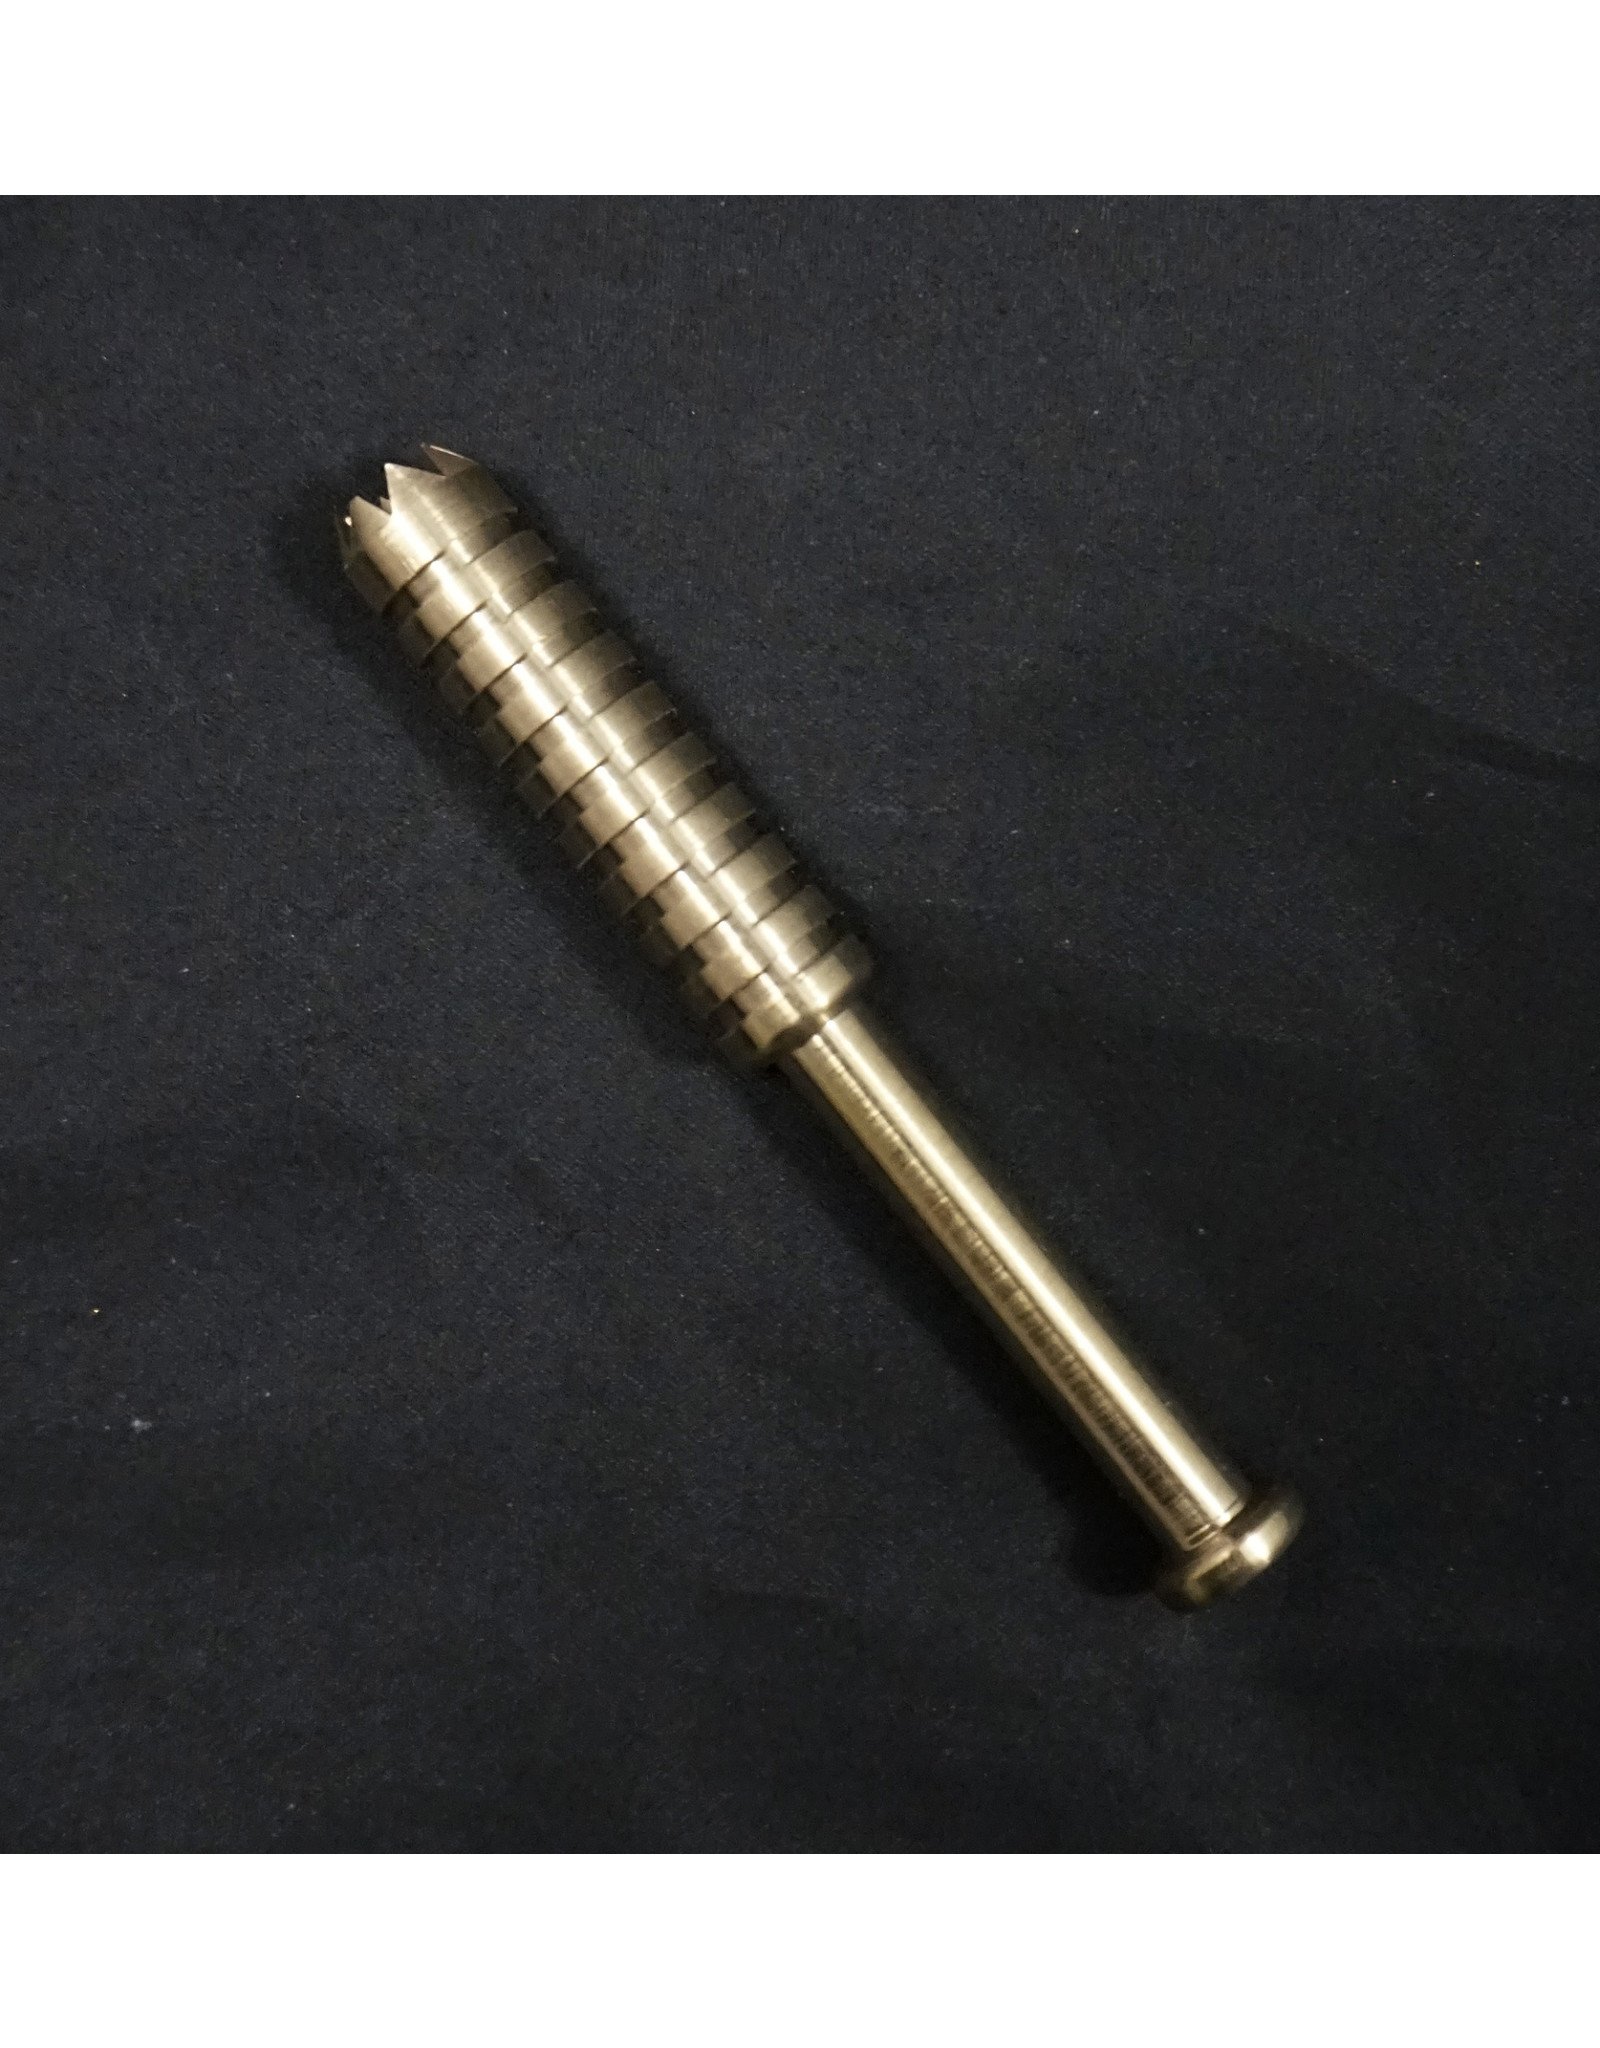 Large Anodized Digger Taster - Brass